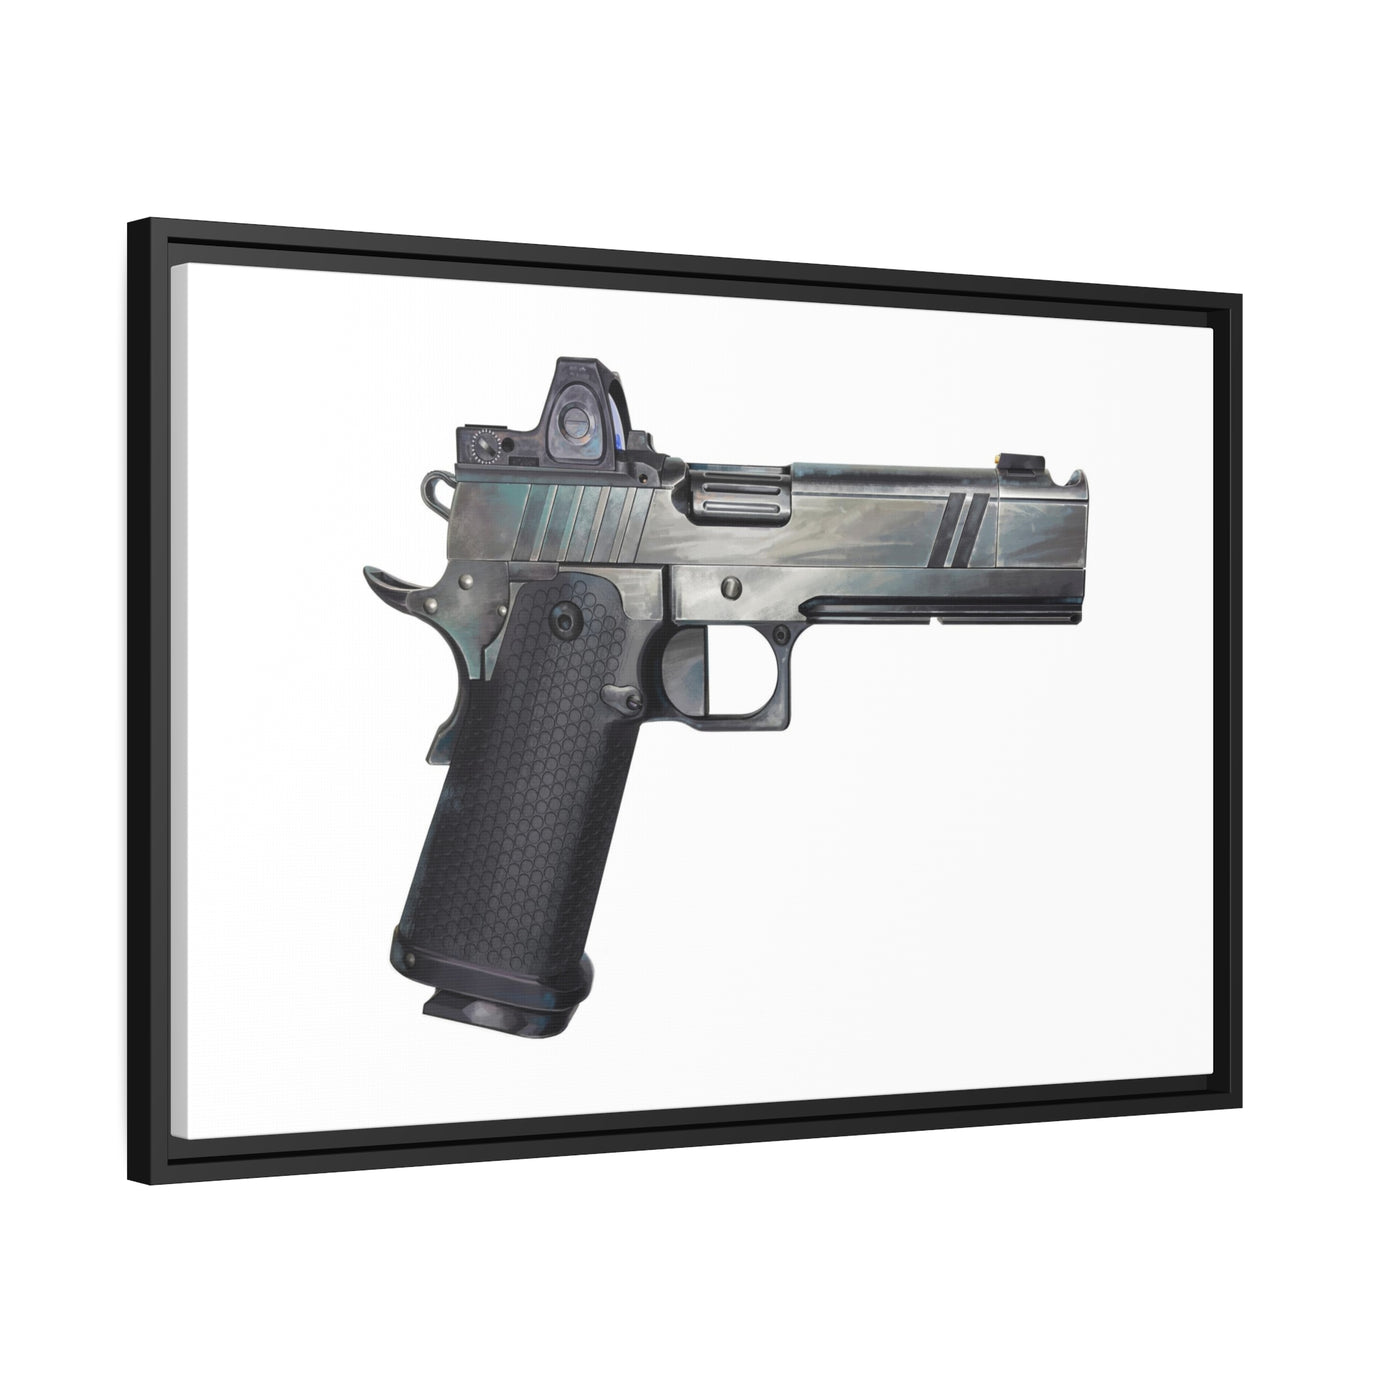 2011 Bravo - Pistol Painting - Just The Piece - Black Framed Wrapped Canvas - Value Collection